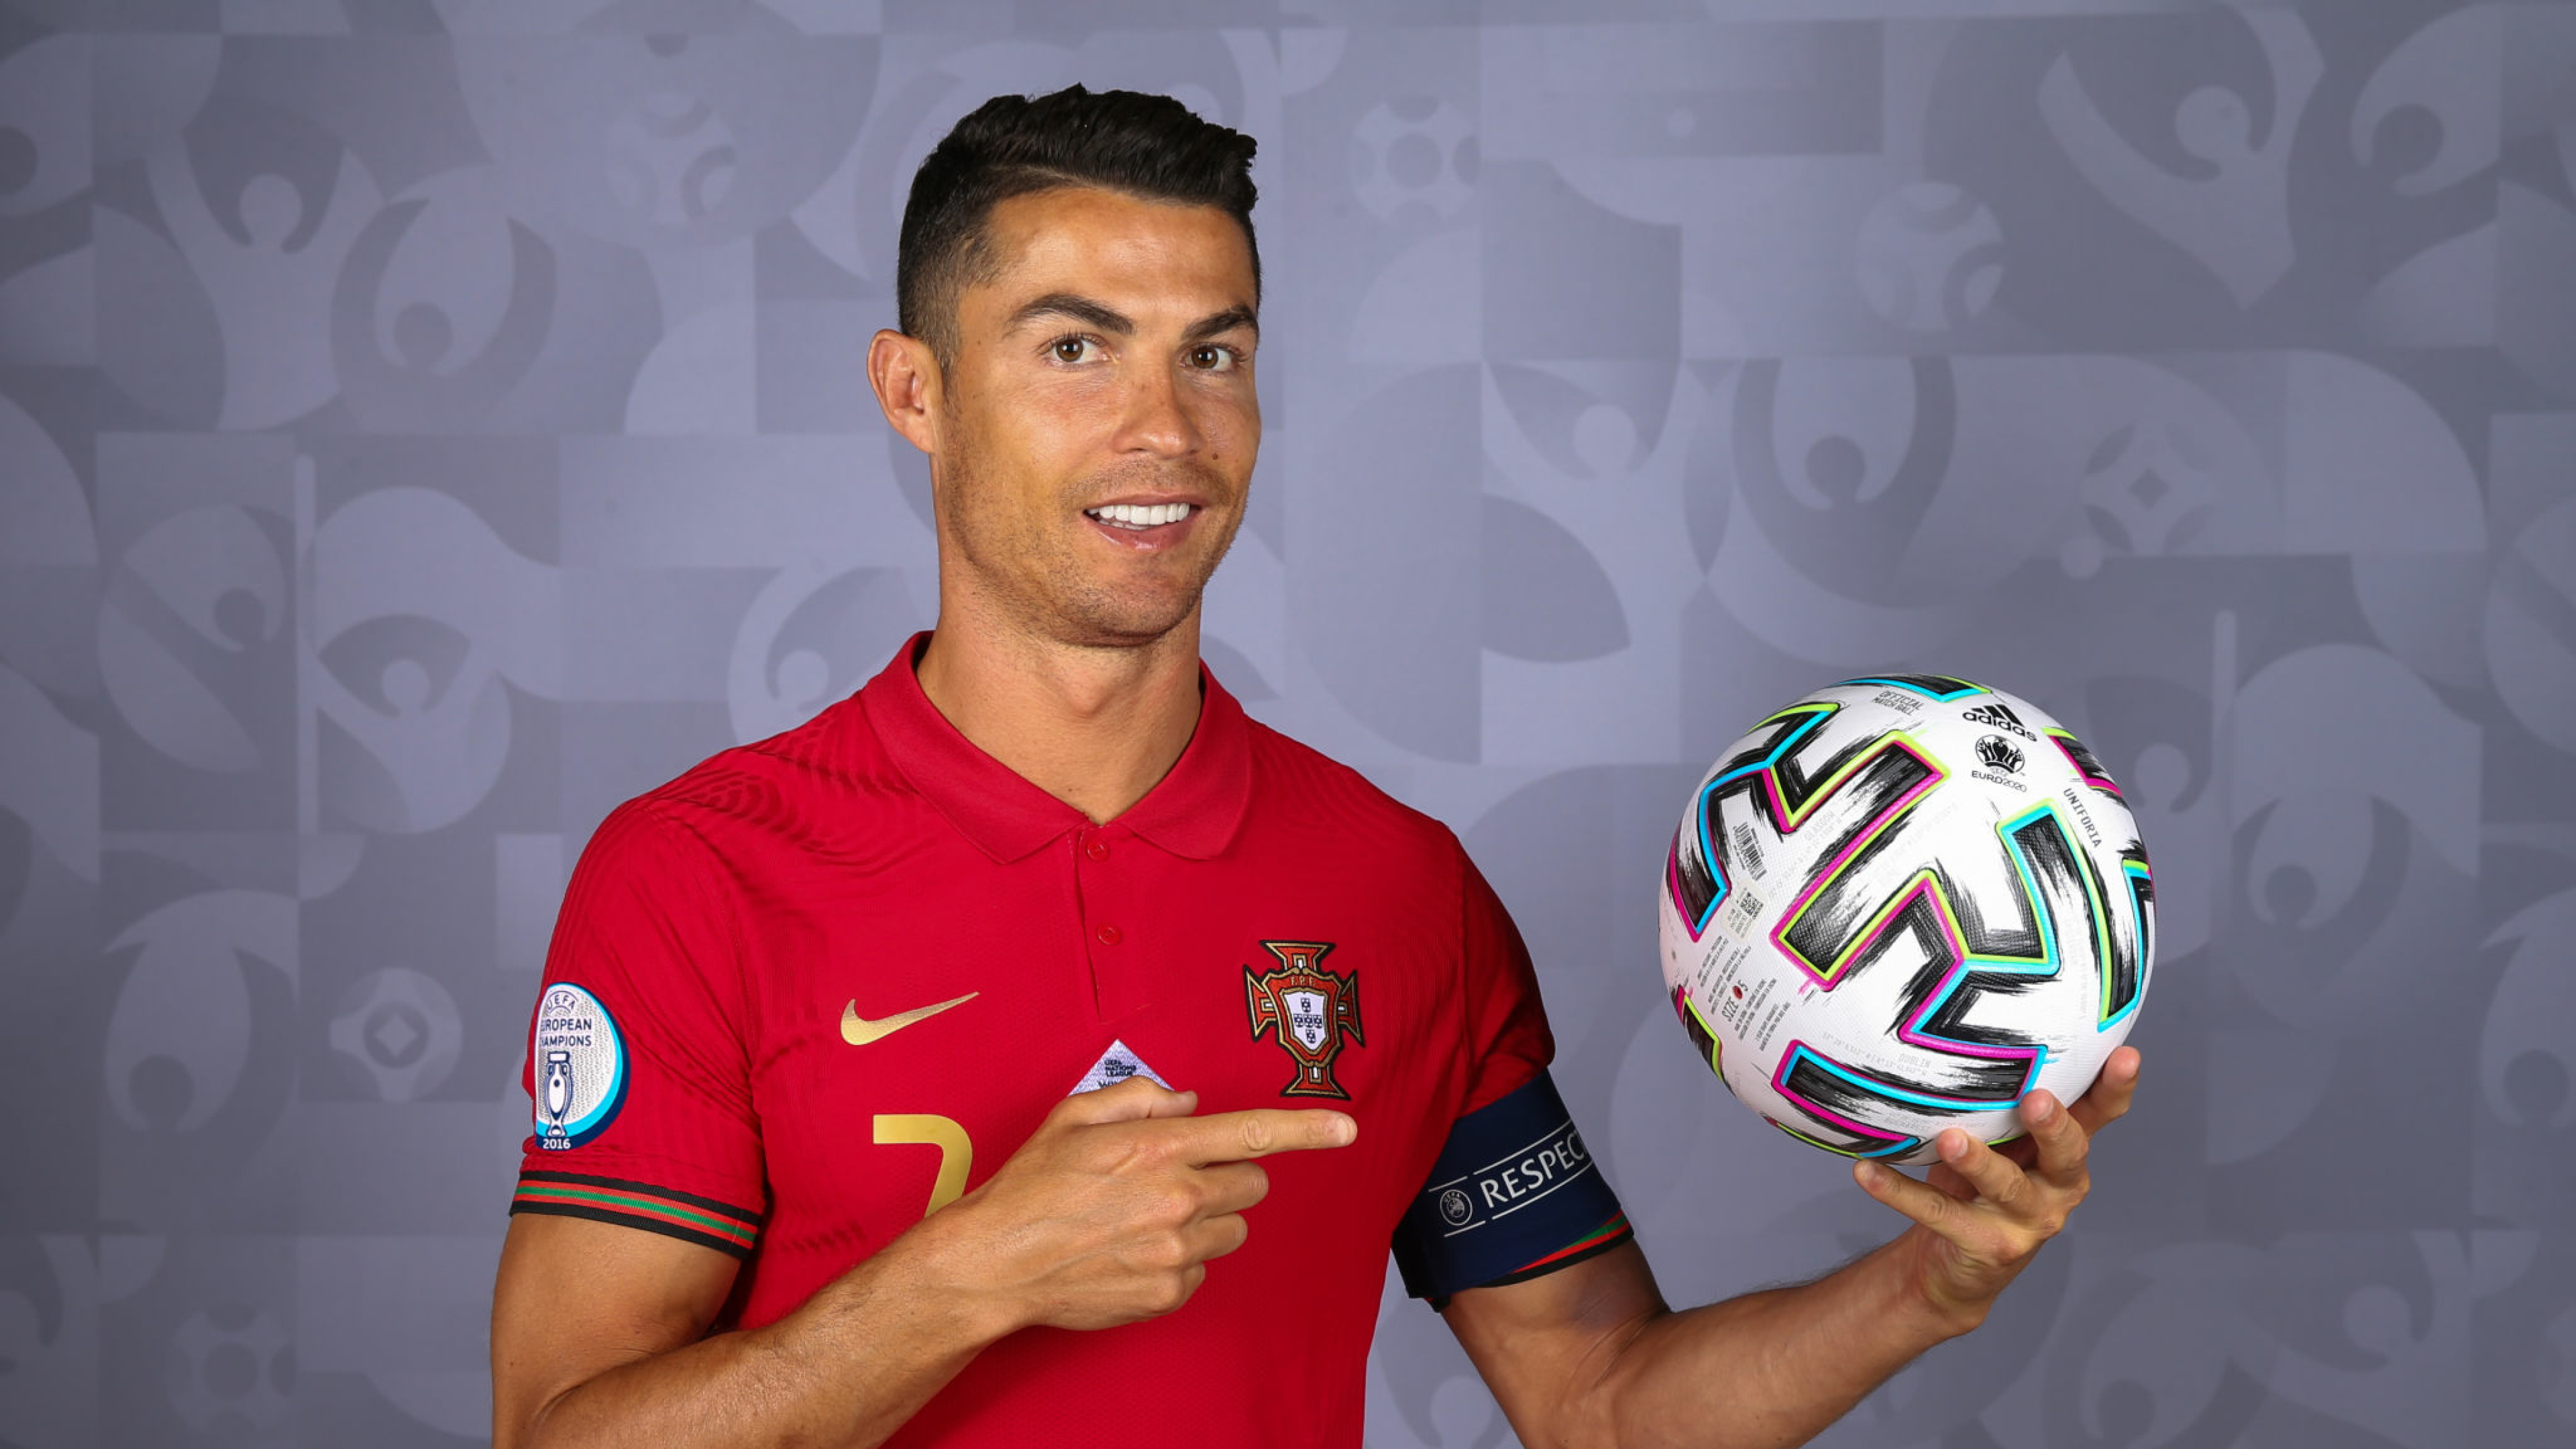 Download wallpapers cristiano ronaldo for desktop free. High Quality HD  pictures wallpapers - Page 1